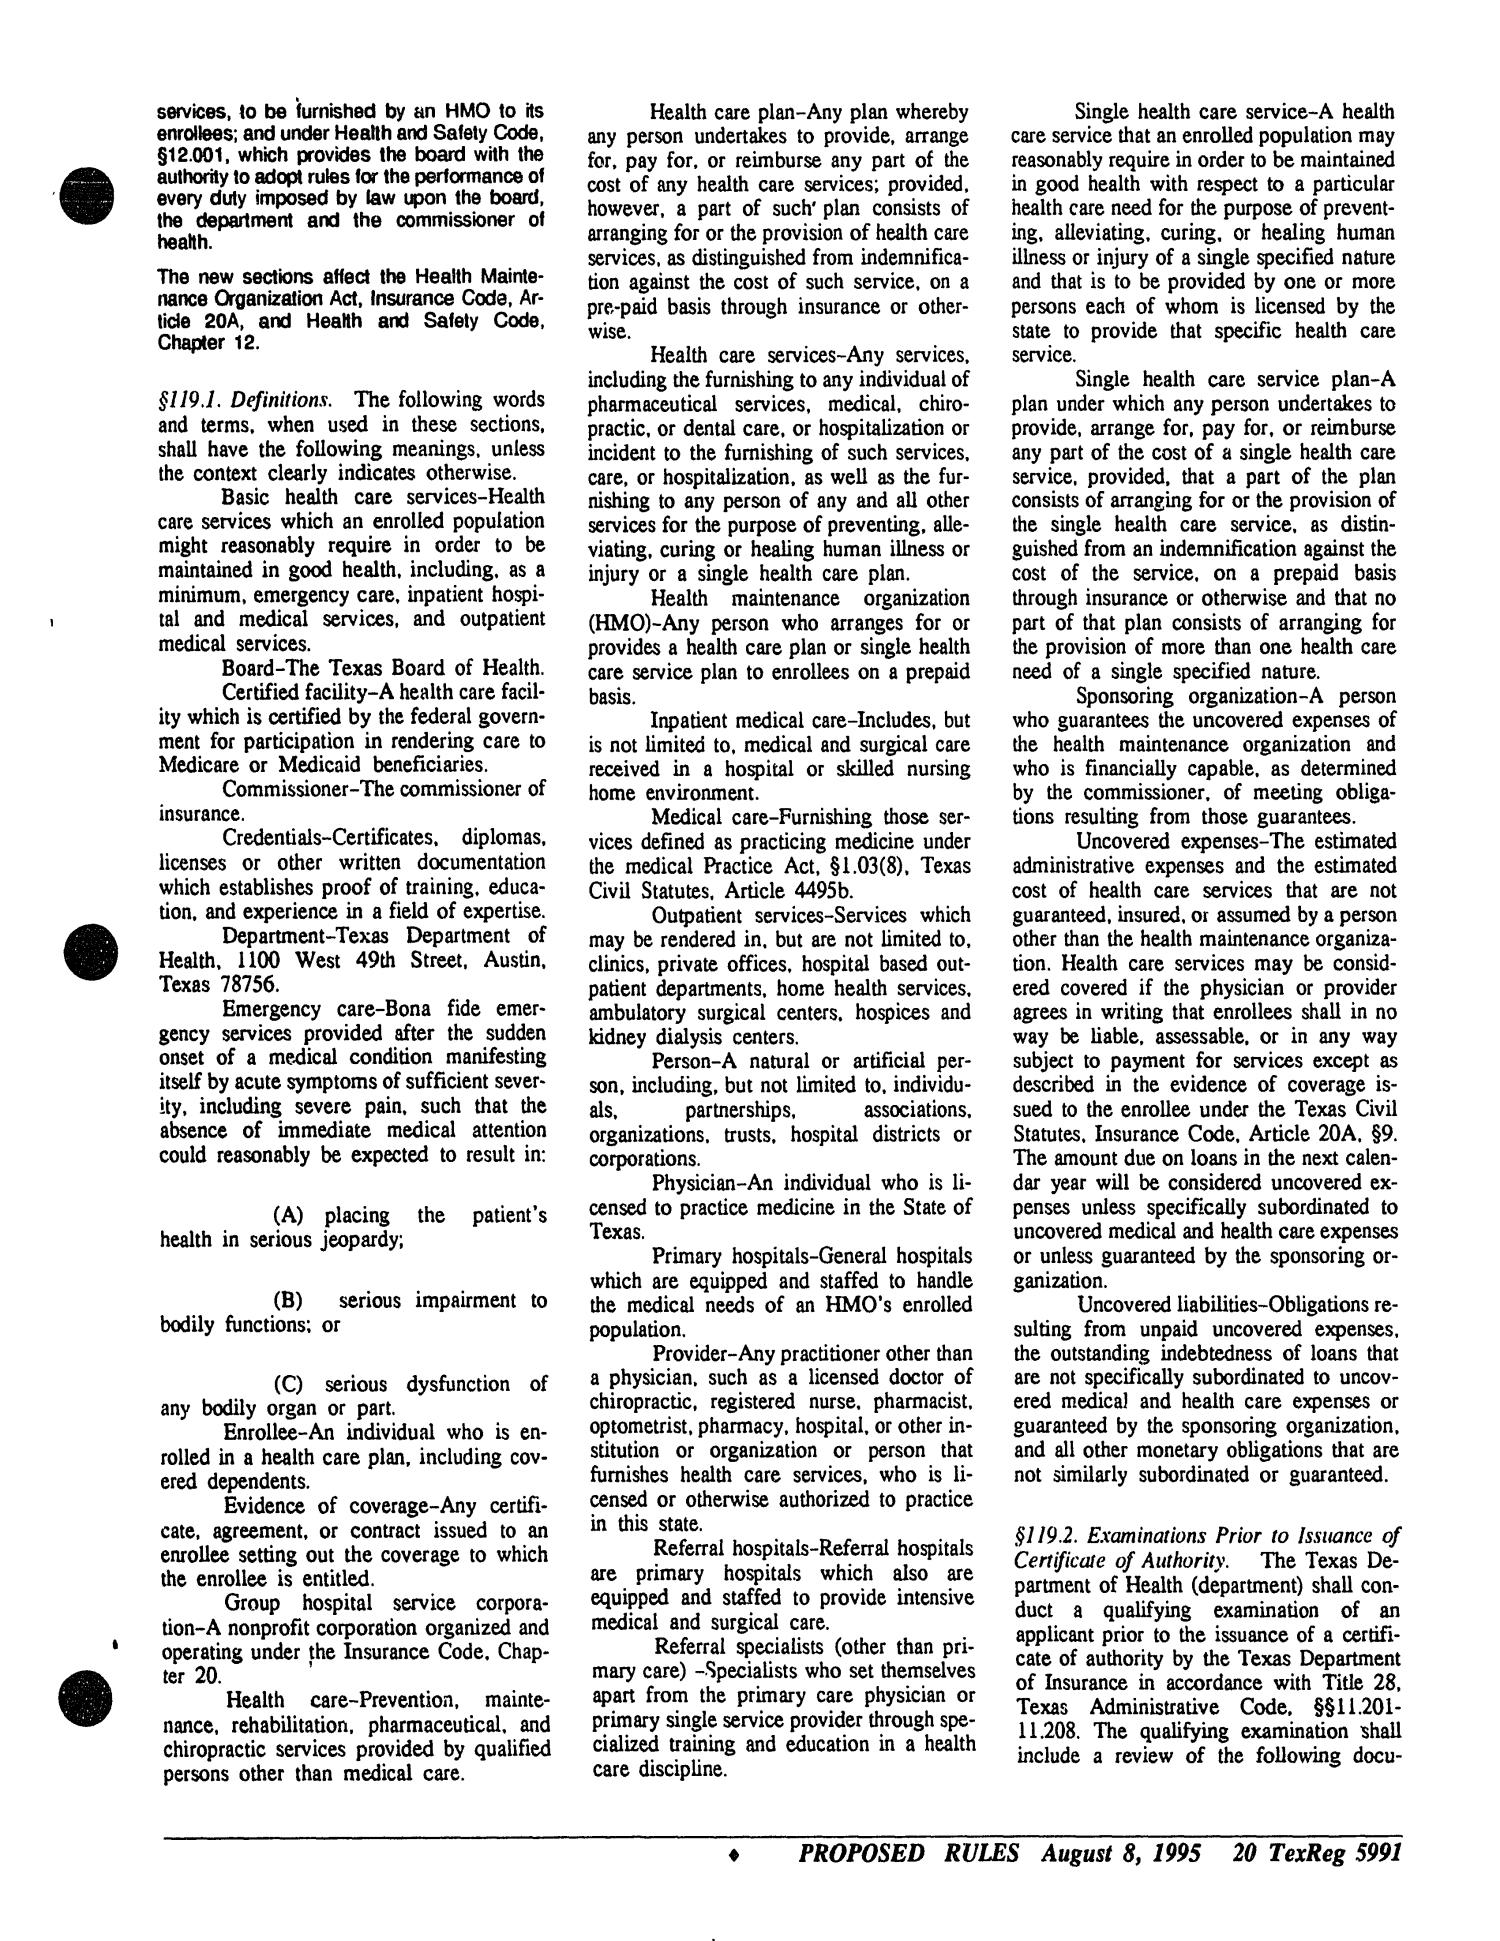 Texas Register, Volume 20, Number 59, Pages 5959-6041, August 8, 1995
                                                
                                                    5991
                                                